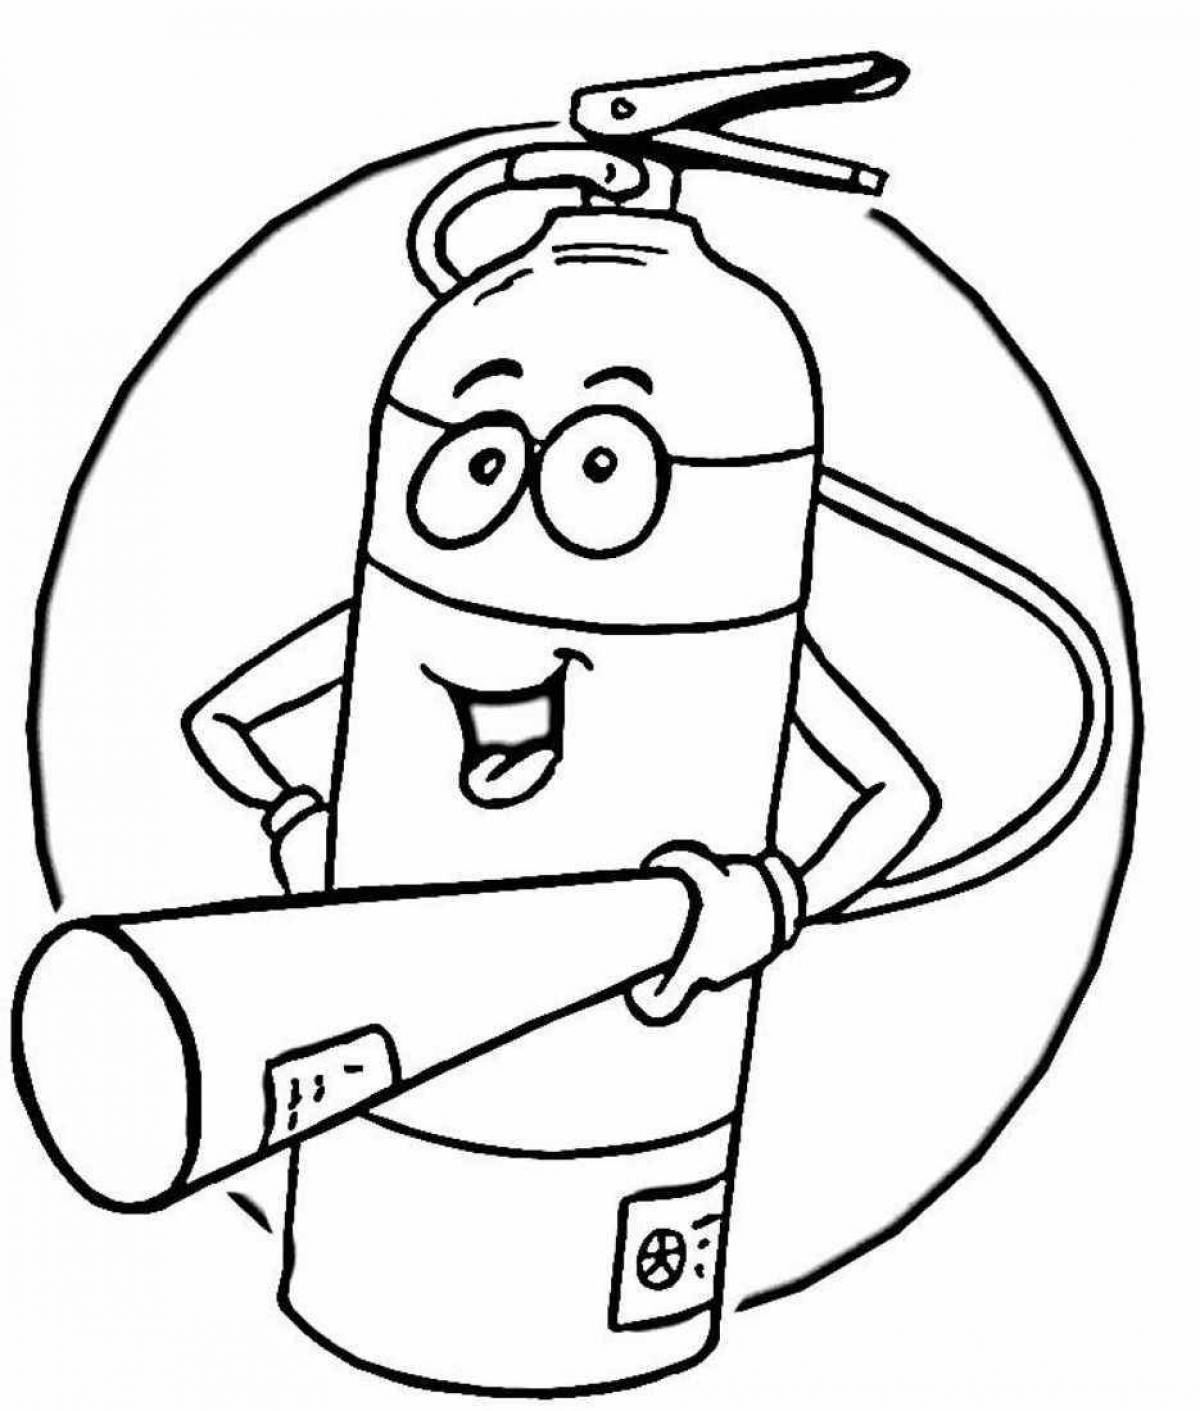 Famous fire safety coloring page